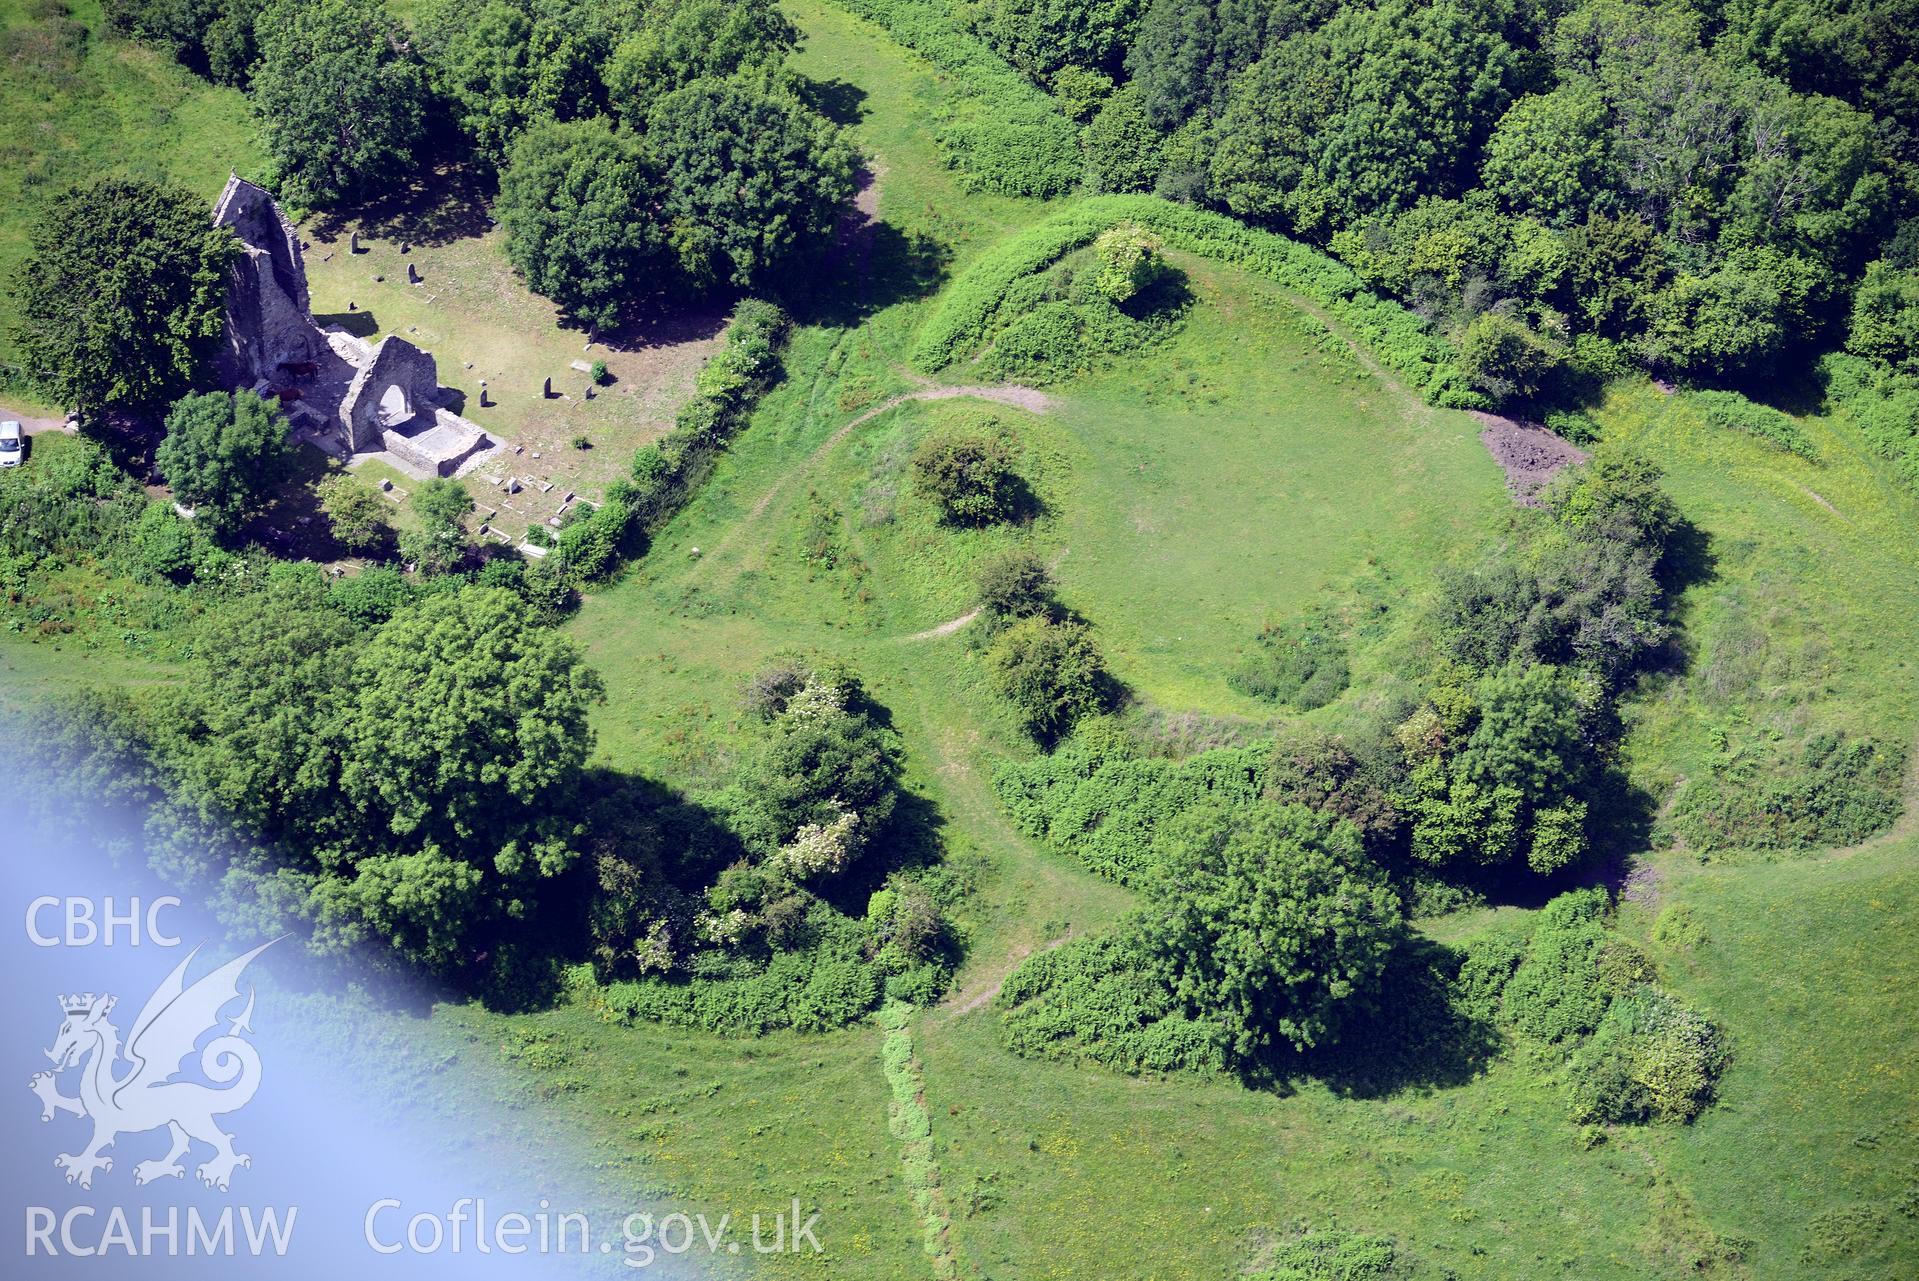 Caerau Castle Ringwork, Caerau Hillfort and the remains of St. Mary's Church, near Cardiff. Oblique aerial photograph taken during the Royal Commission's programme of archaeological aerial reconnaissance by Toby Driver on 29th June 2015.